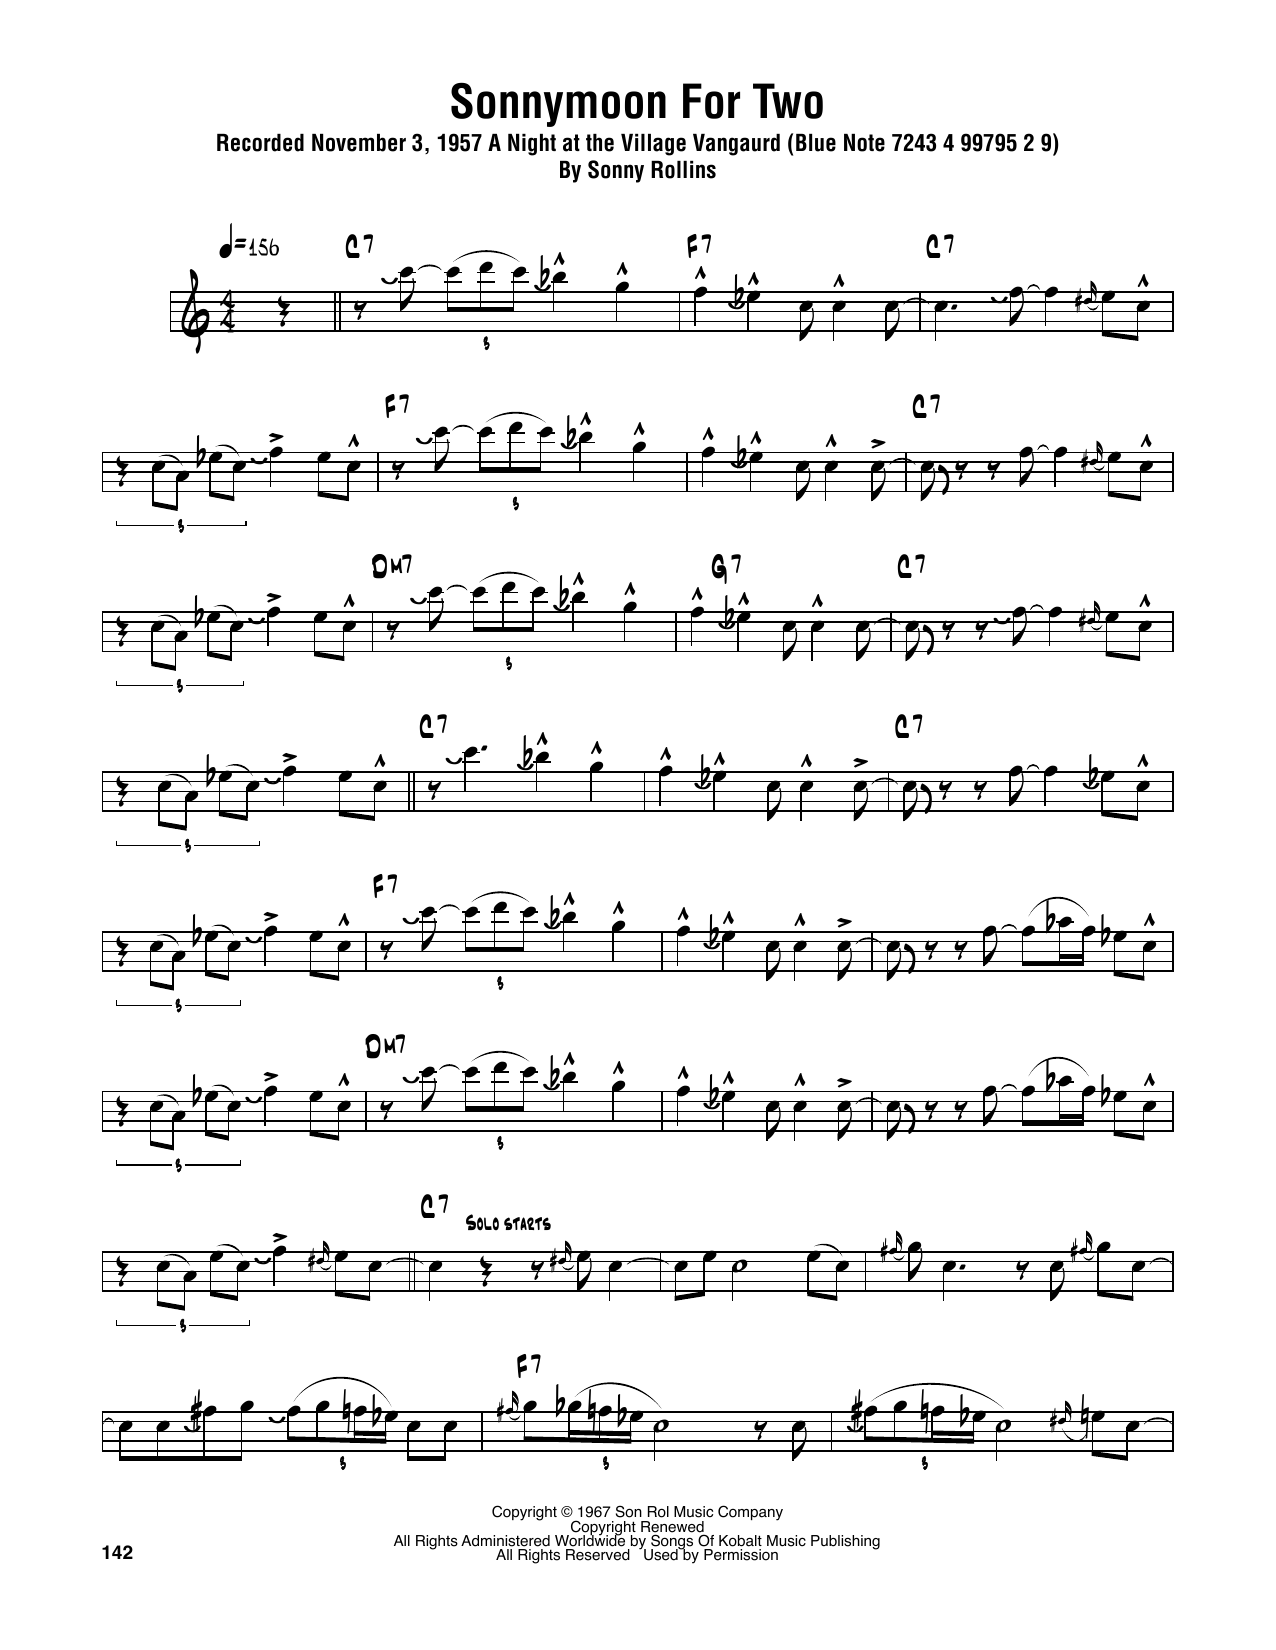 Download Sonny Rollins Sonnymoon For Two Sheet Music